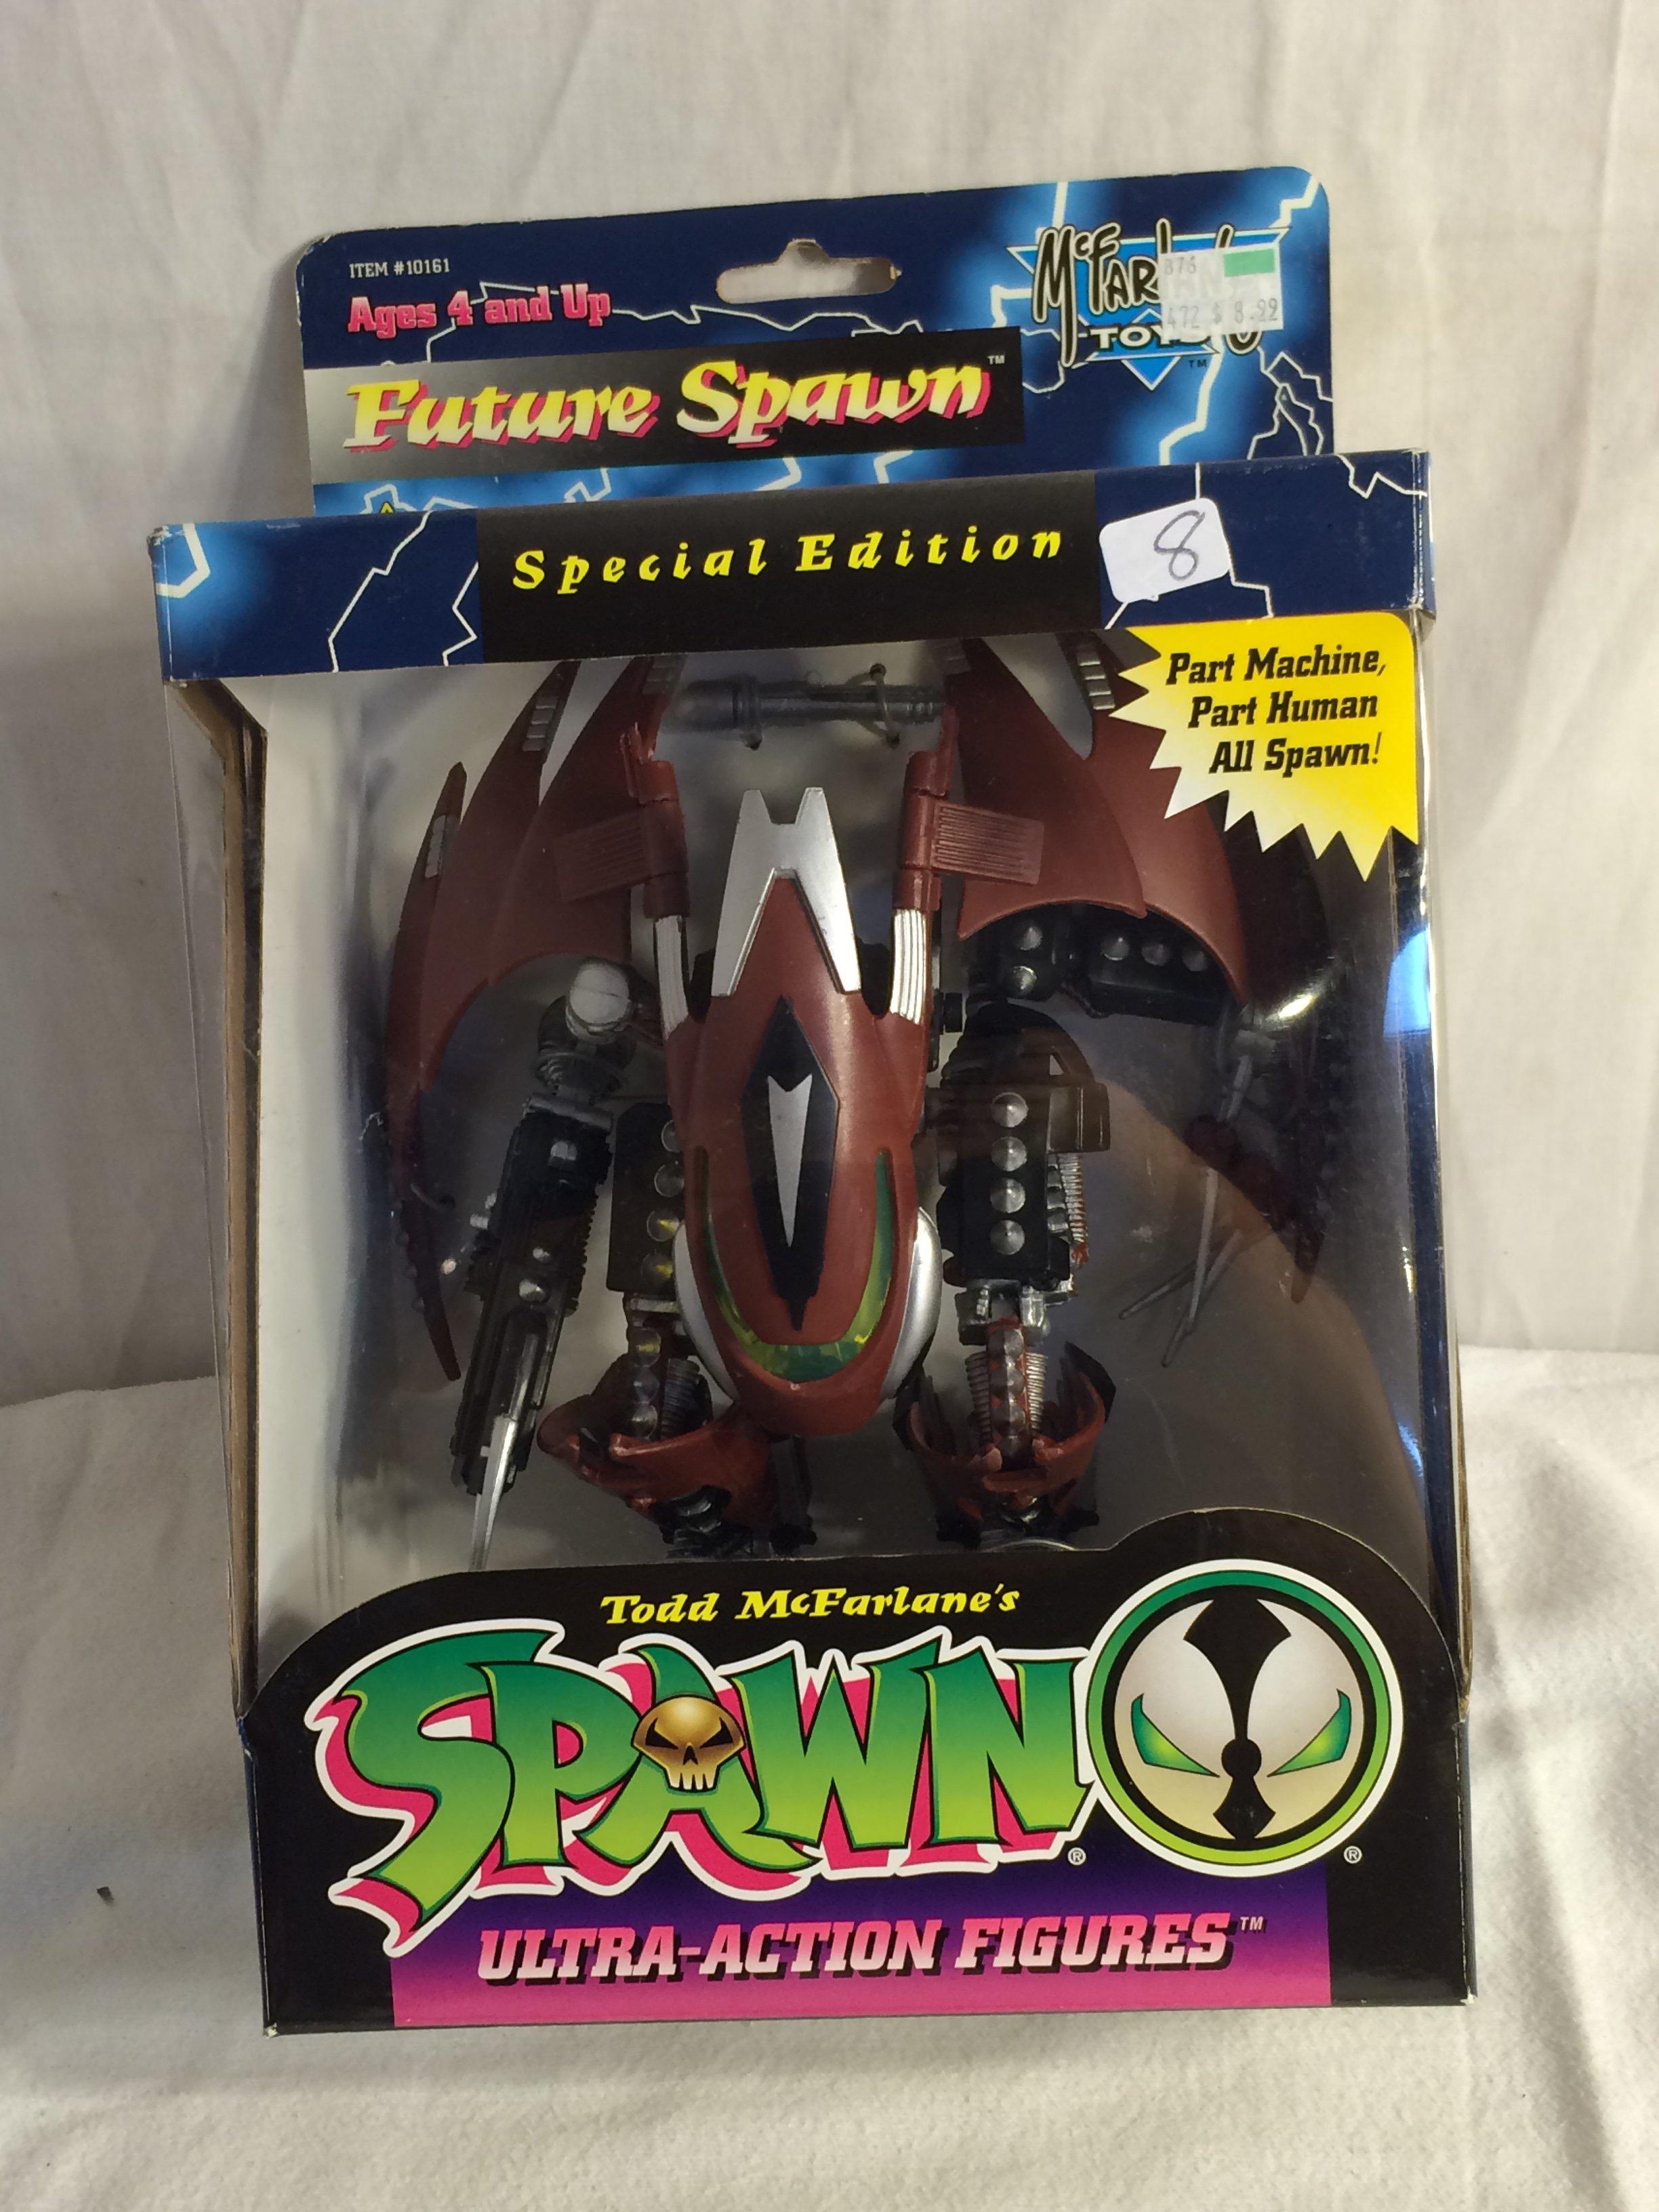 Collector McFarlane's Spawn Ultra-Action Figures Special Edition Future Spawn 10"Tall Box Size